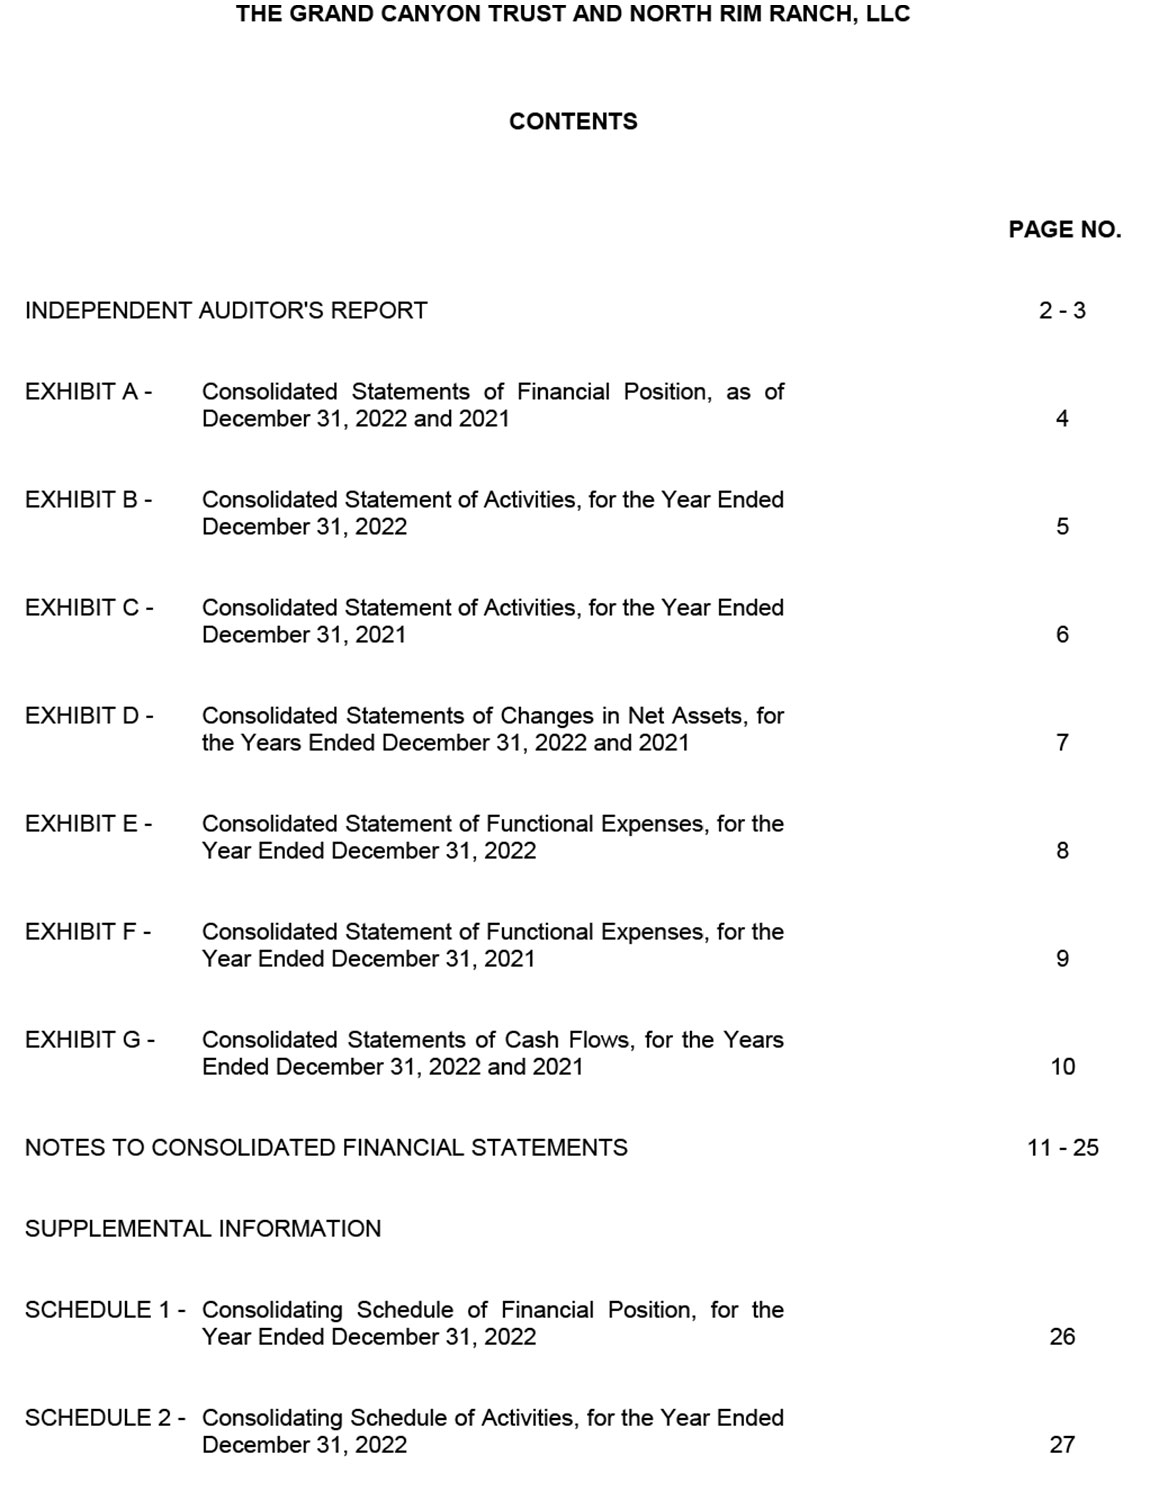 The Grand Canyon Trust's audited financial statement